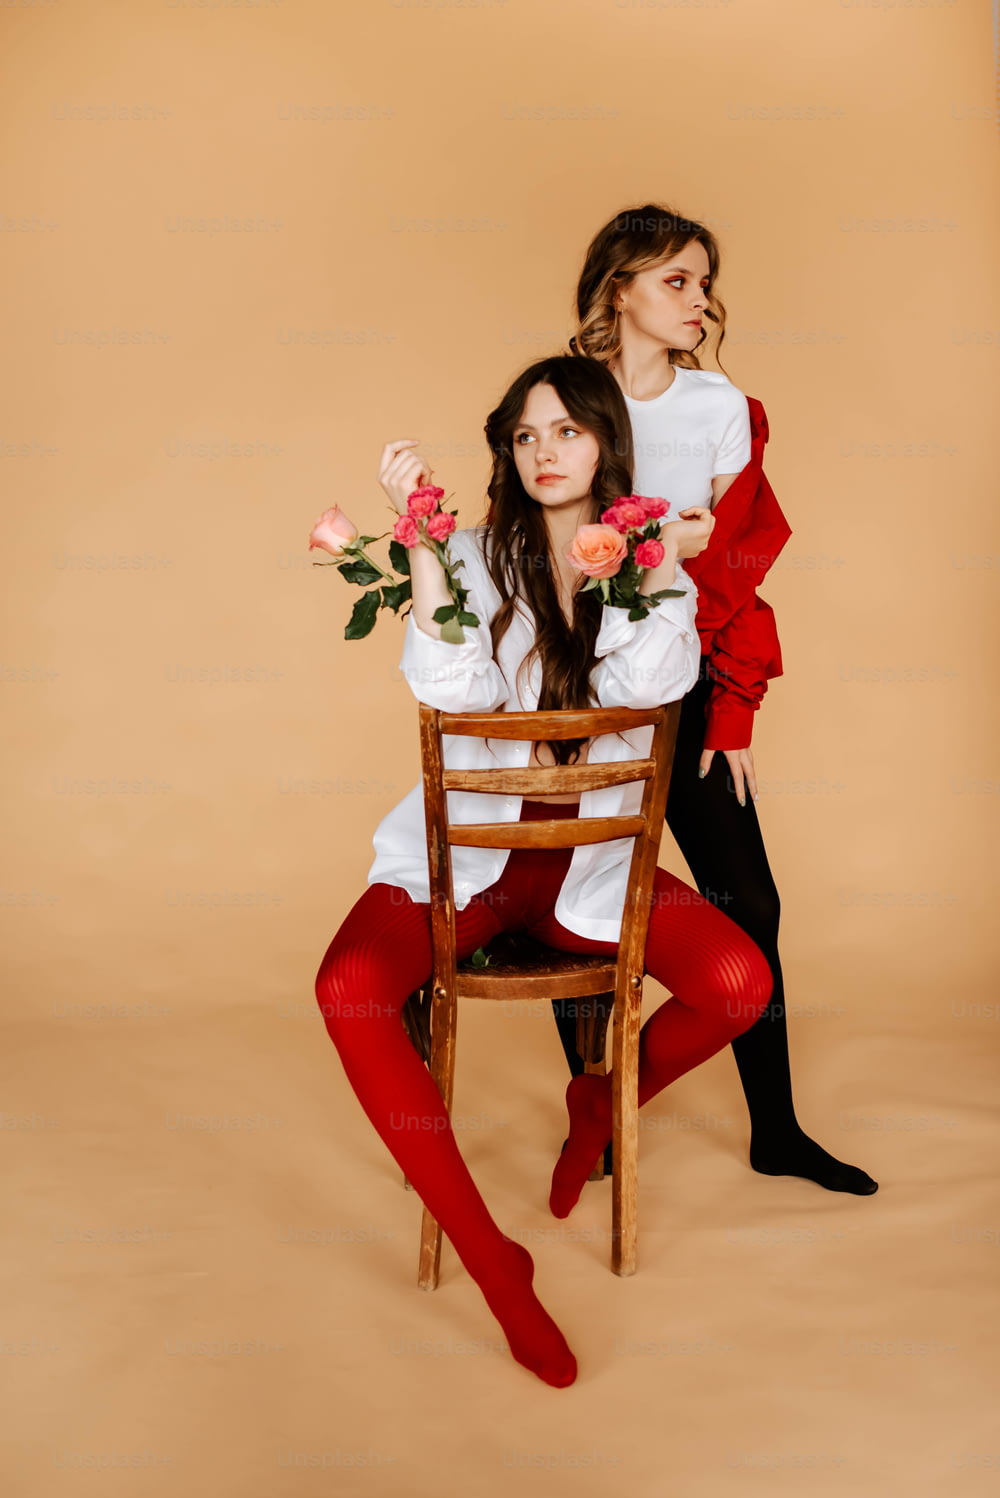 two women sitting on a chair with flowers in their hands